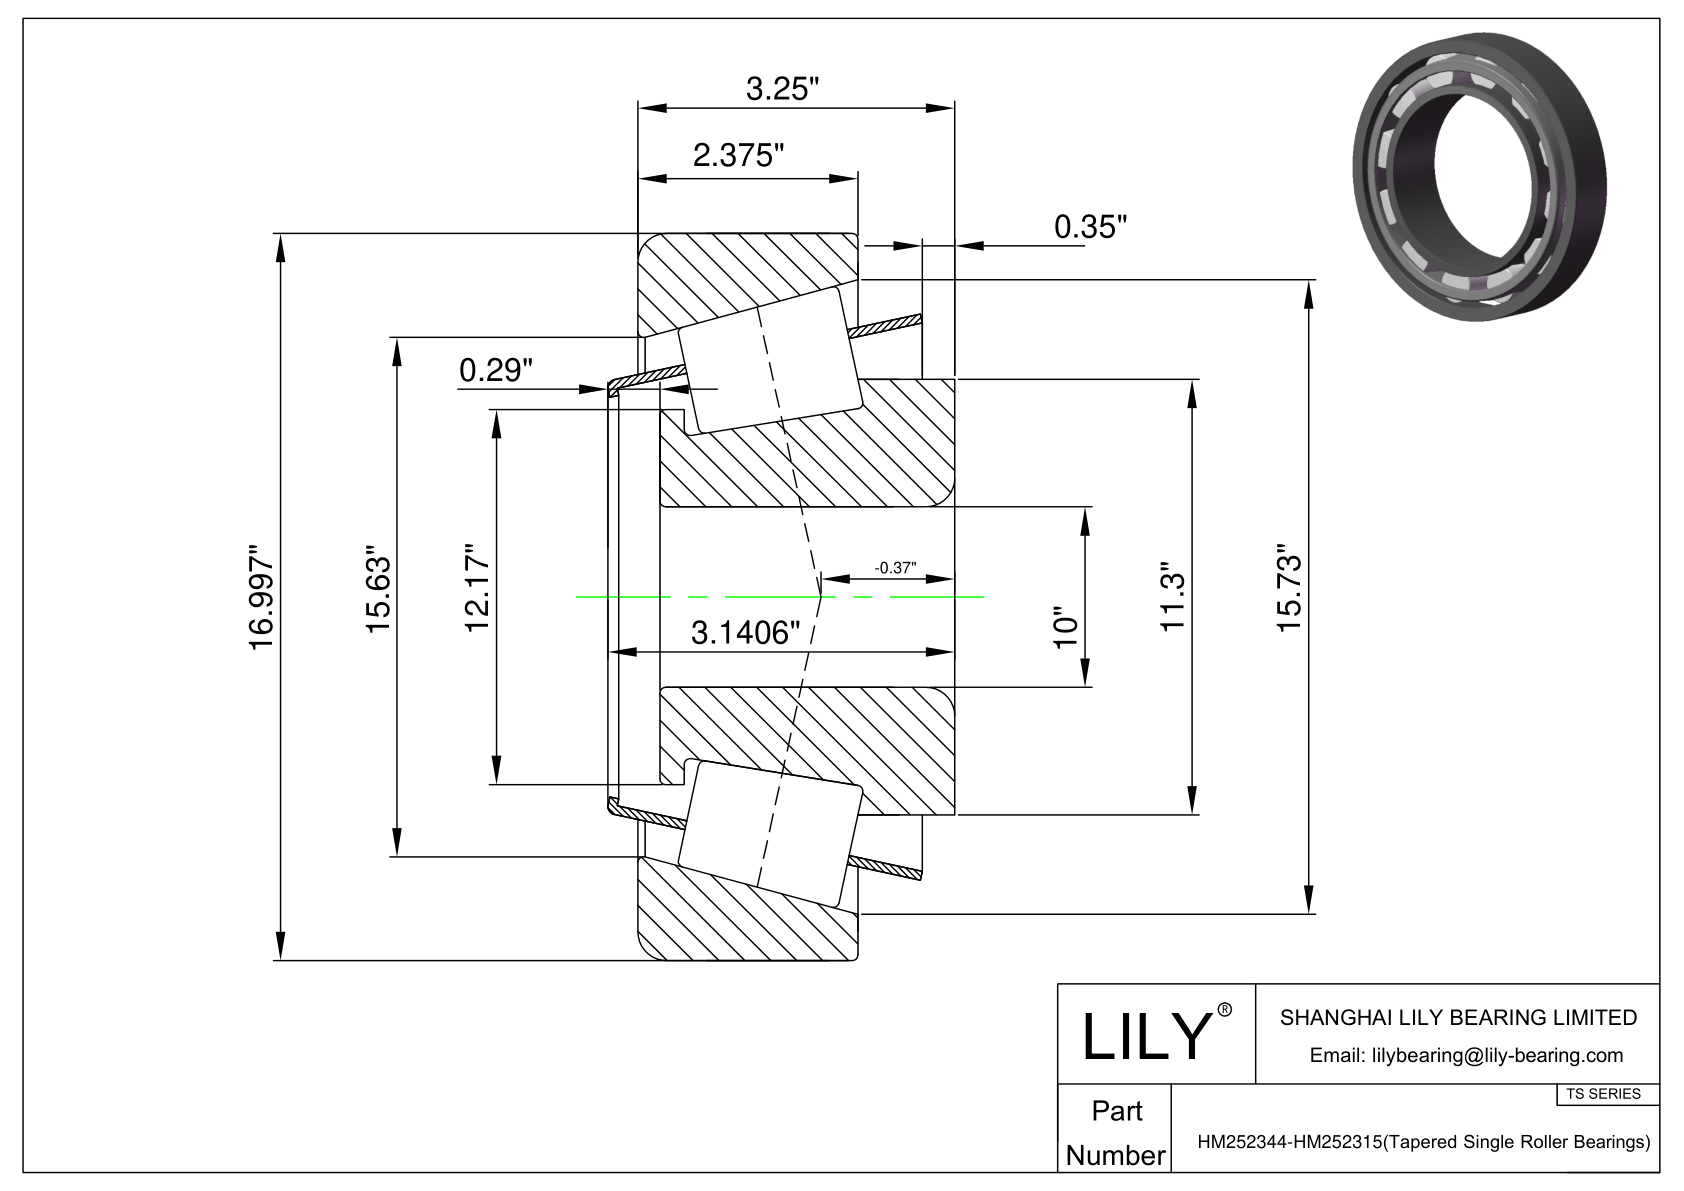 HM252344-HM252315 TS (Tapered Single Roller Bearings) (Imperial) cad drawing